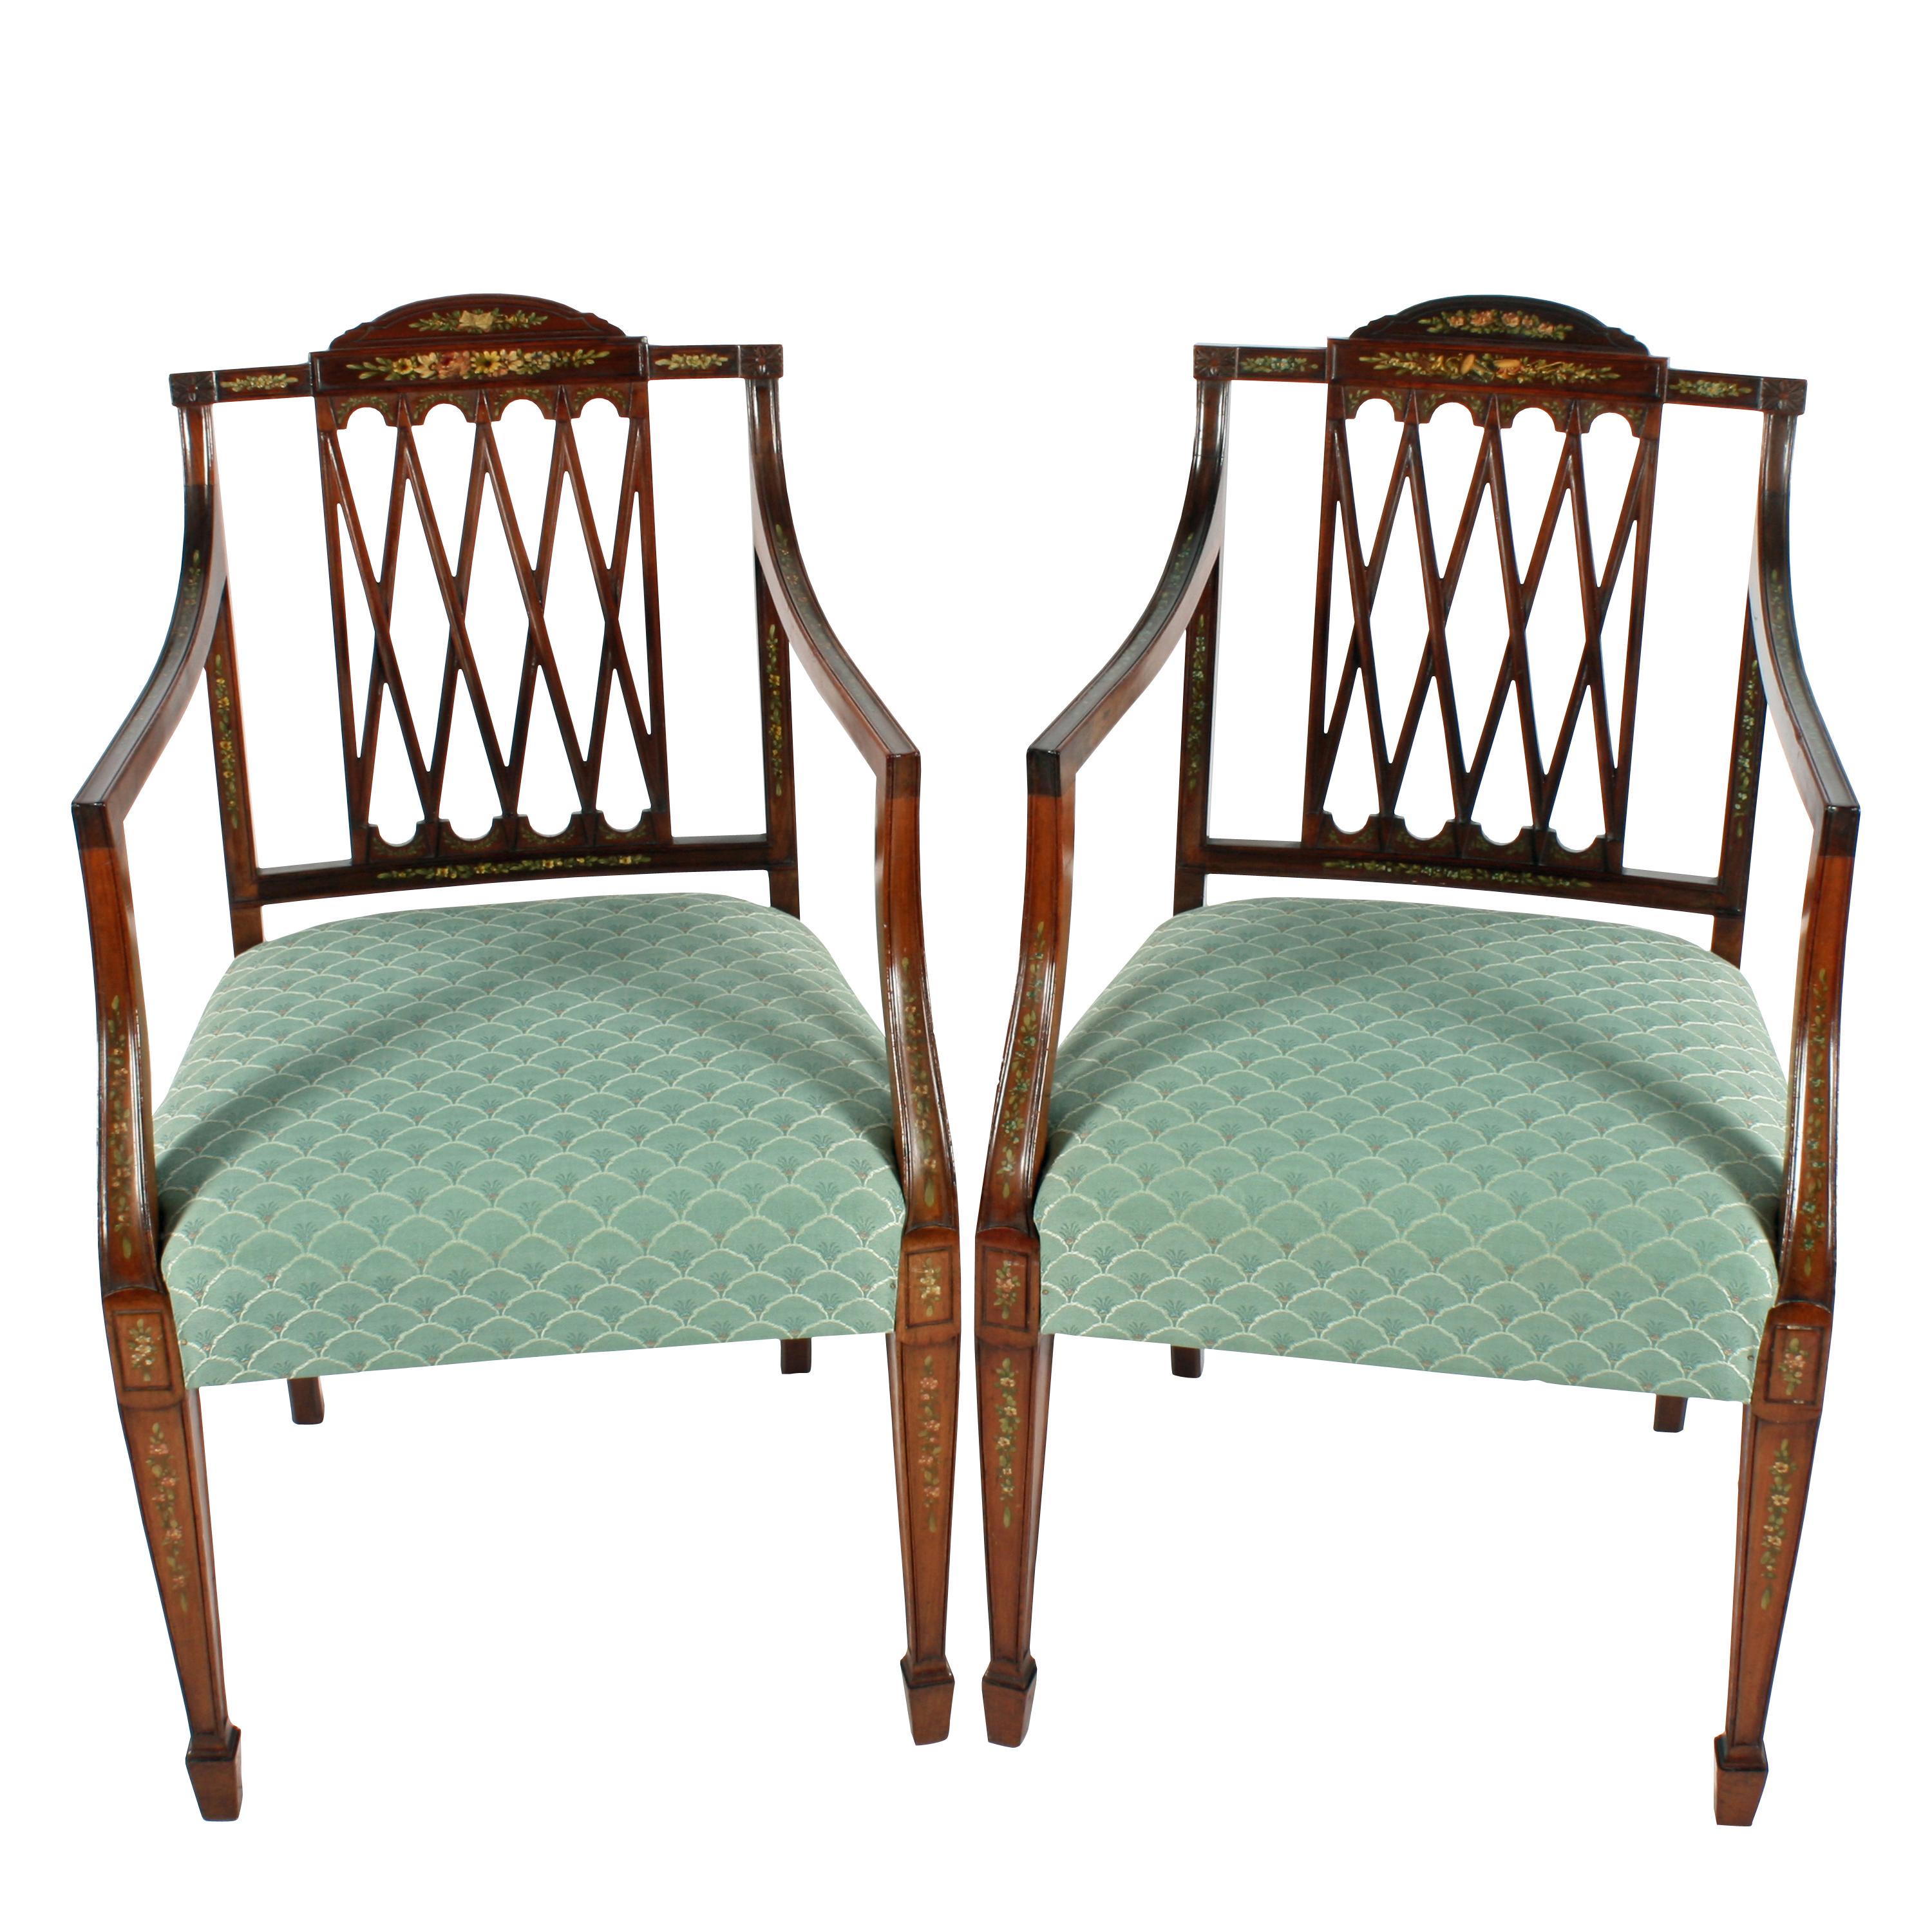 A fine pair of late 19th century Hepplewhite style mahogany elbow chairs.

The chairs have quadruped 'X' backs with a centre domed top rail and straight arm which have an integral concave support.

The front legs are square and tapering and have